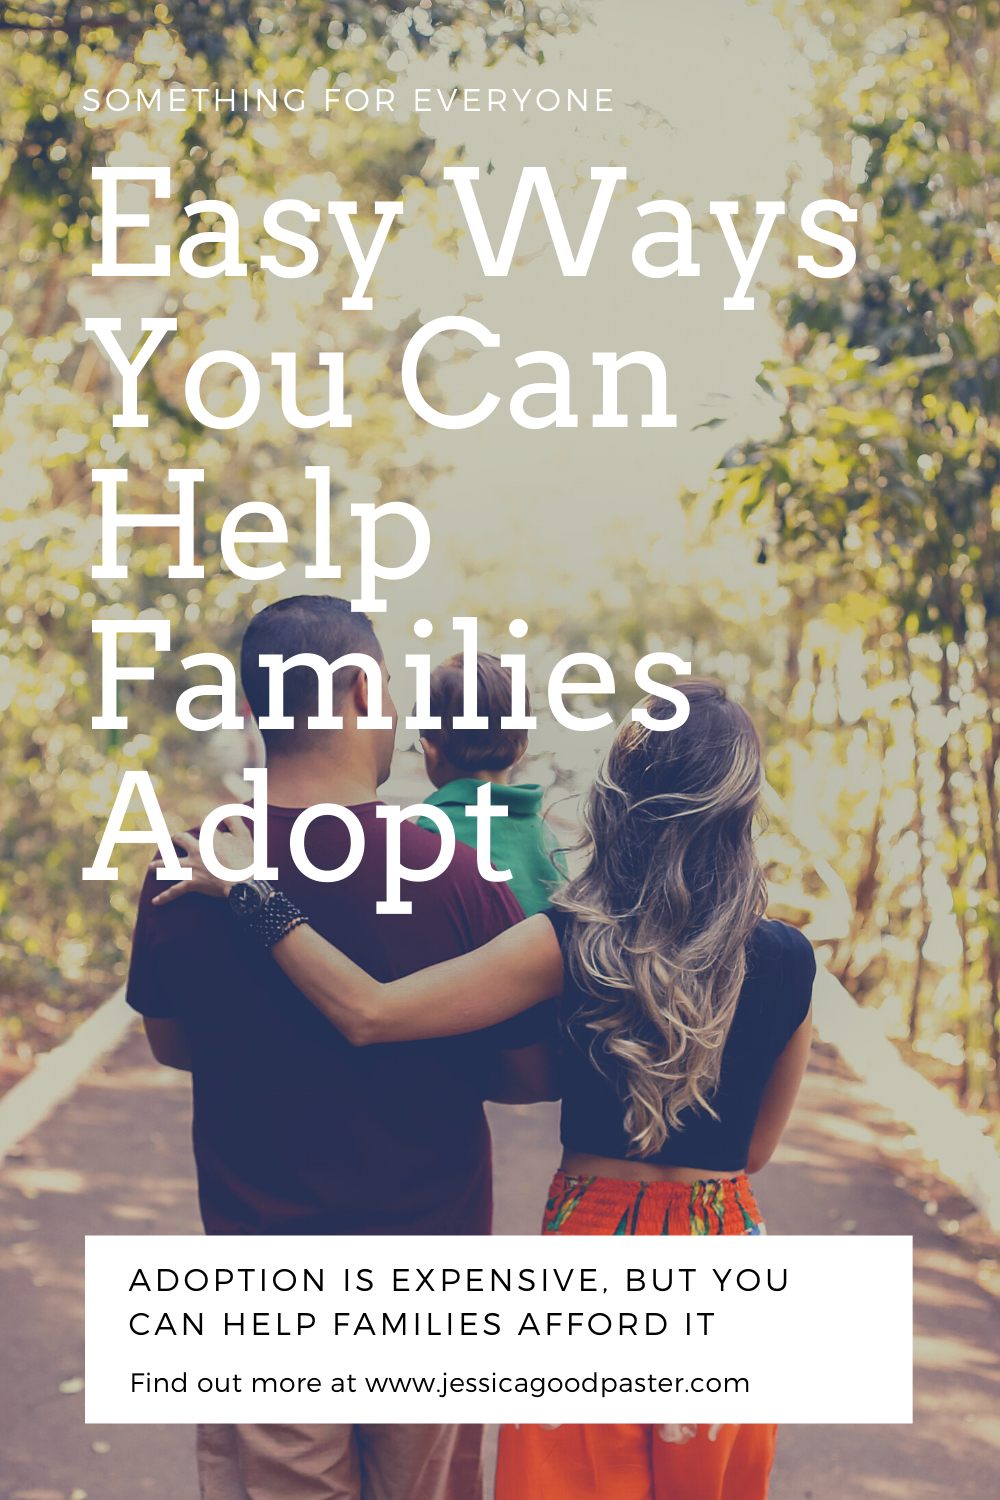 Easy Ways You Can Help Families Adopt...Without Leaving Your Couch! | Shop for a cause or donate to these adoption fundraisers you can support right now. Find the perfect gift or something for you or your home all while funding adoptions! #adoption #fundraising #fundraiser #shopforacause #gifts #donate